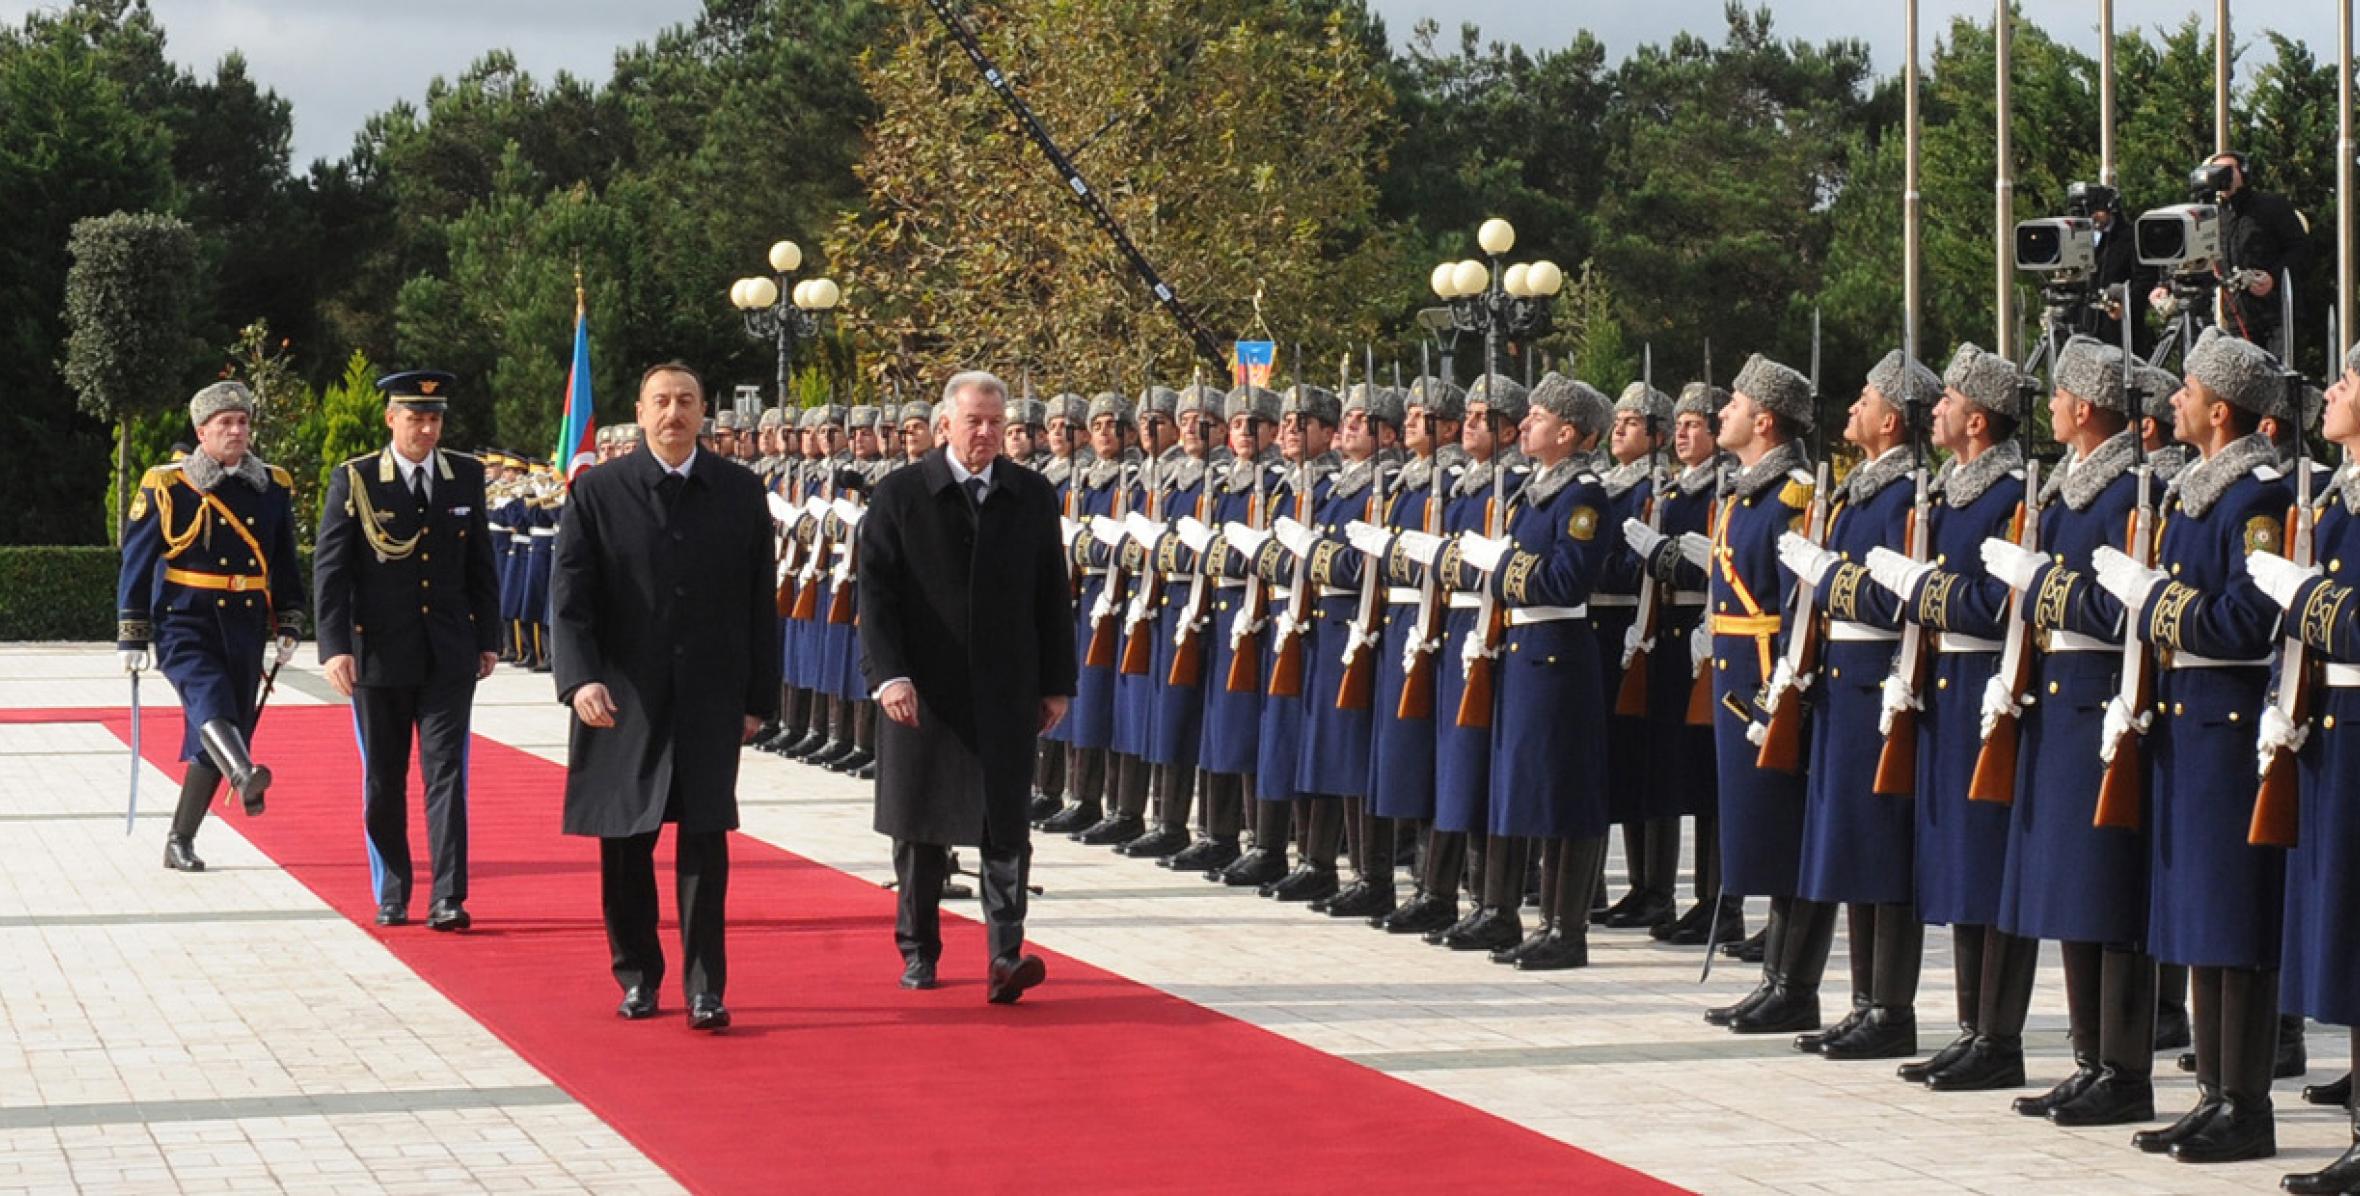 Official welcoming ceremony of President of the Republic of Hungary Pal Schmitt was held